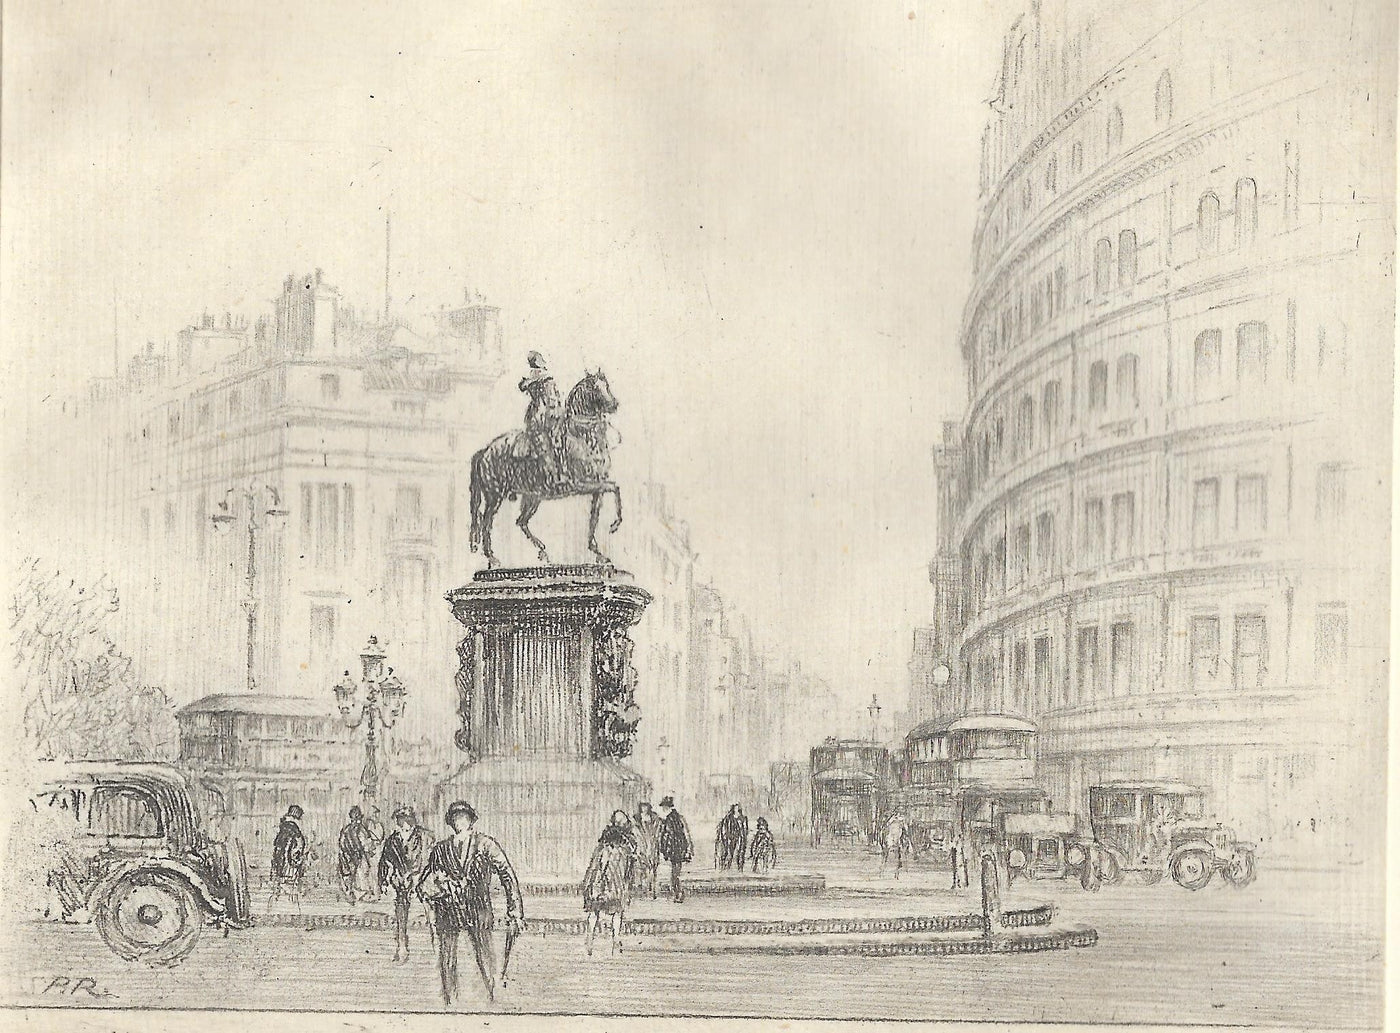 King Charles statue, Trafalgar Square, London, 1929. vintage etching by Percy Robertson. Published 1930.